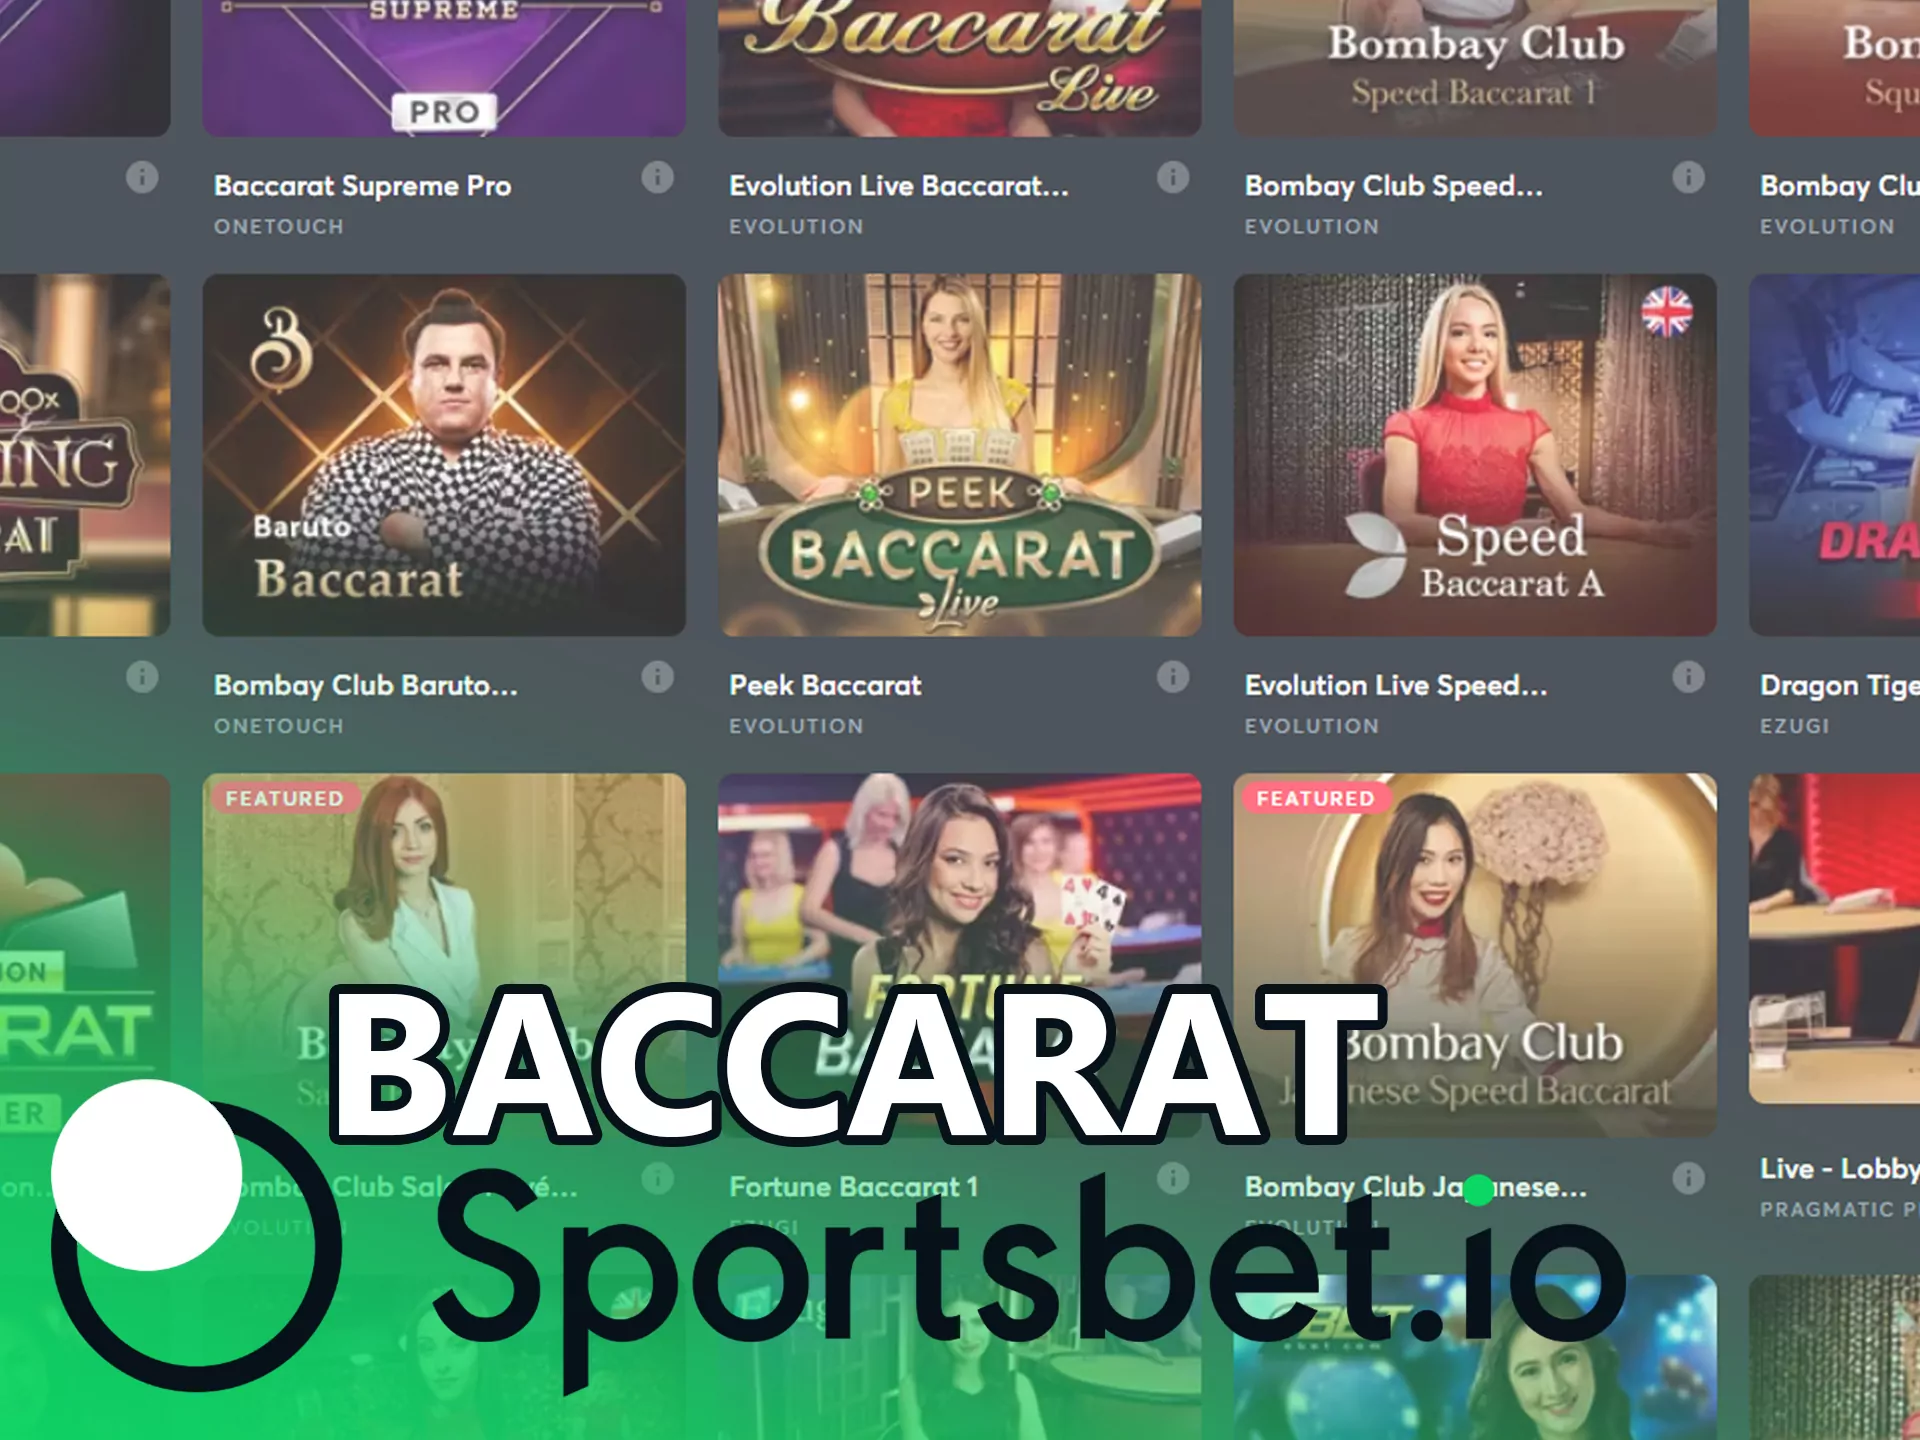 There is also baccarat in the Sportsbet casino.